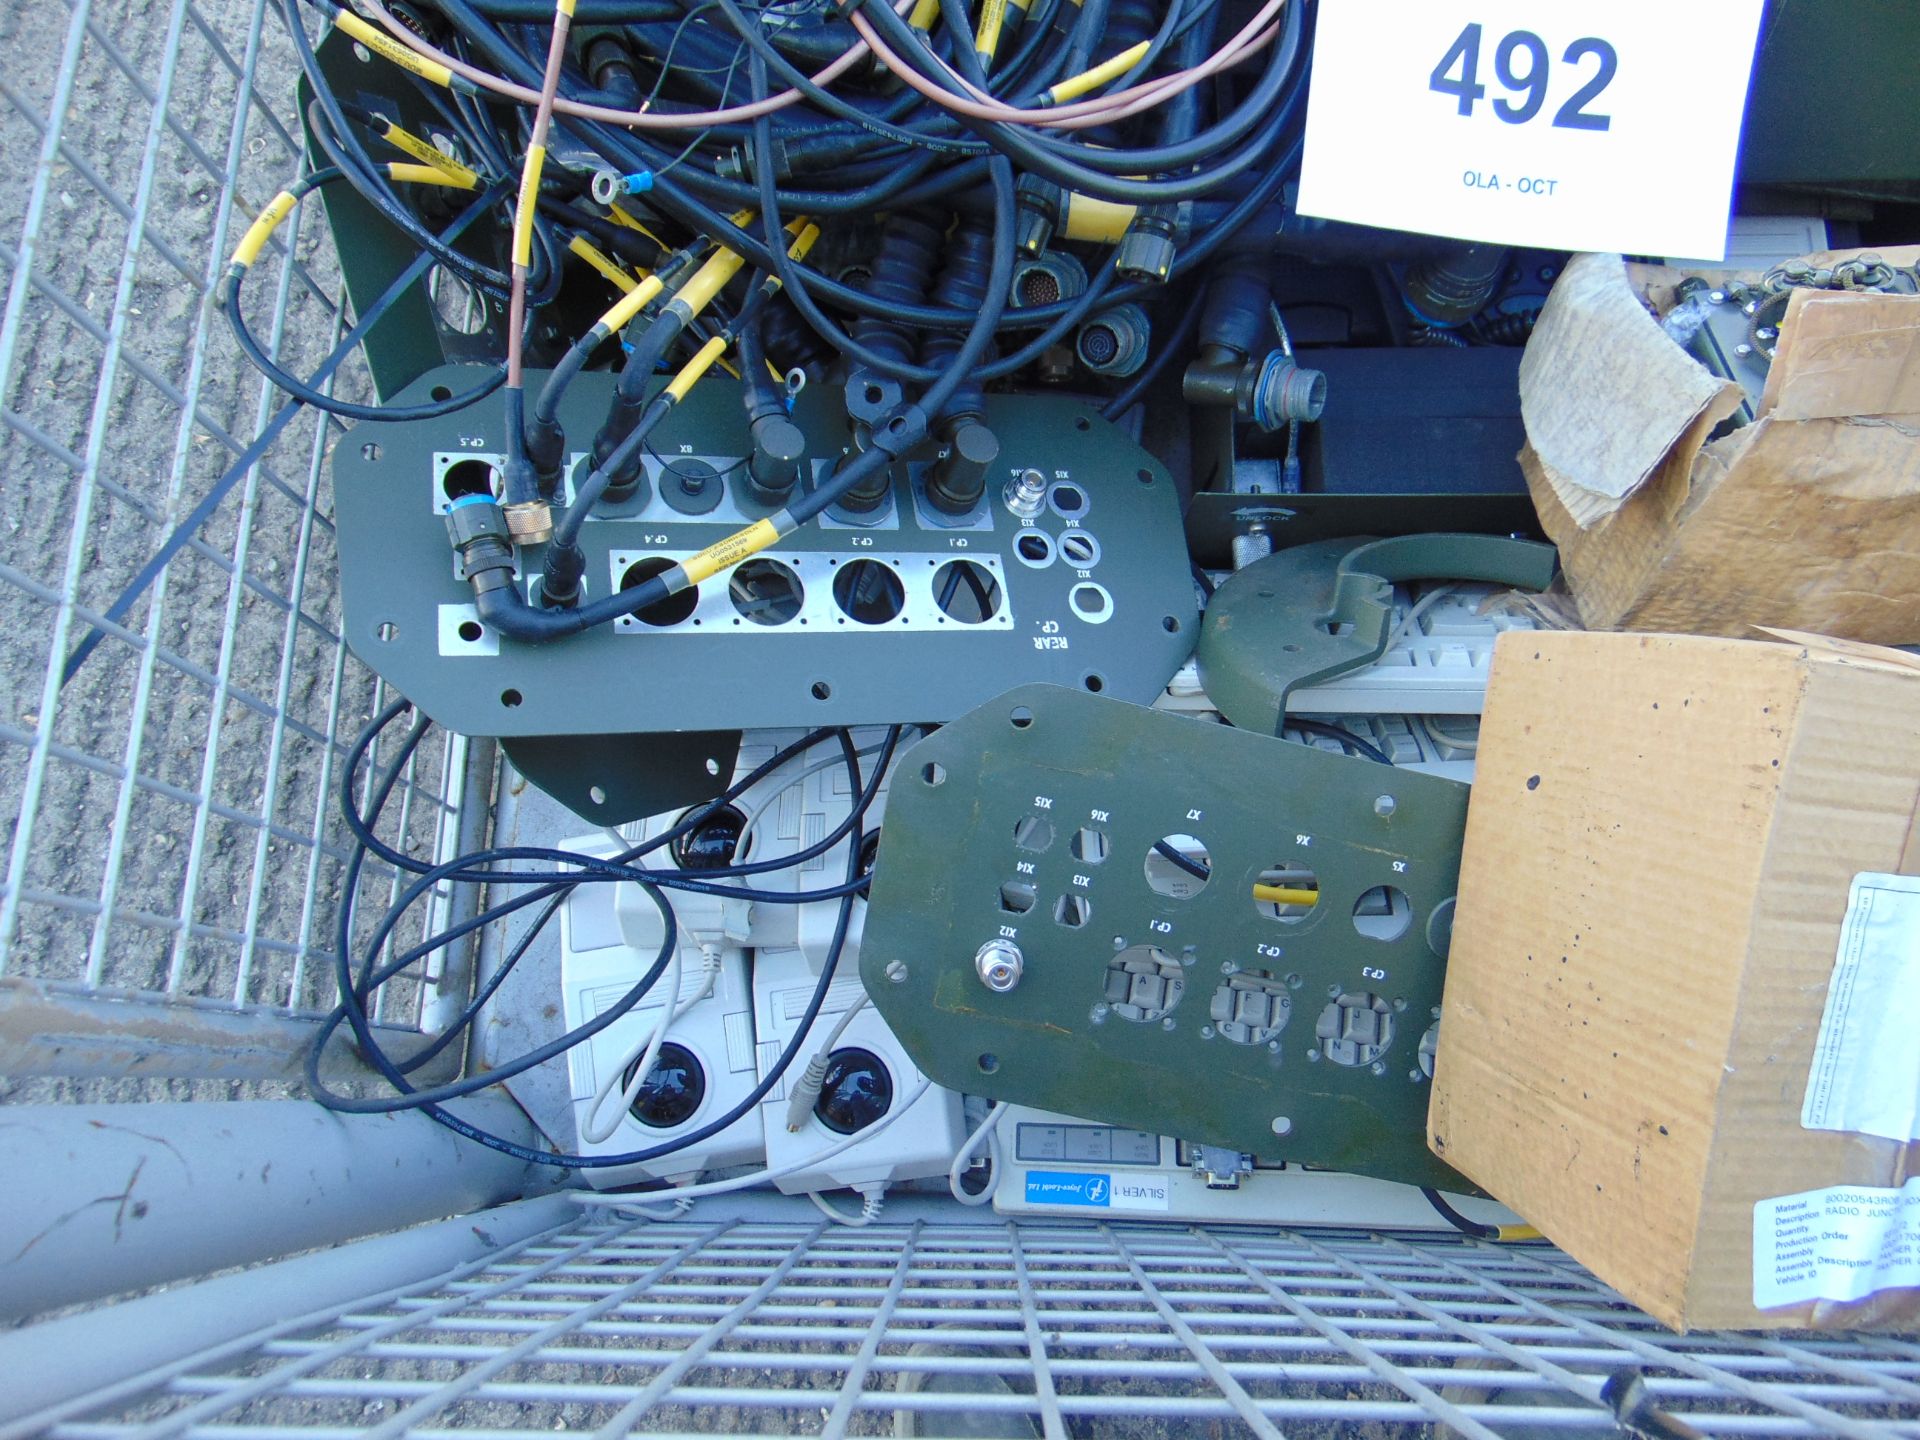 1 x Stillage of Comms Equipment and Spares, Cables etc - Image 7 of 7